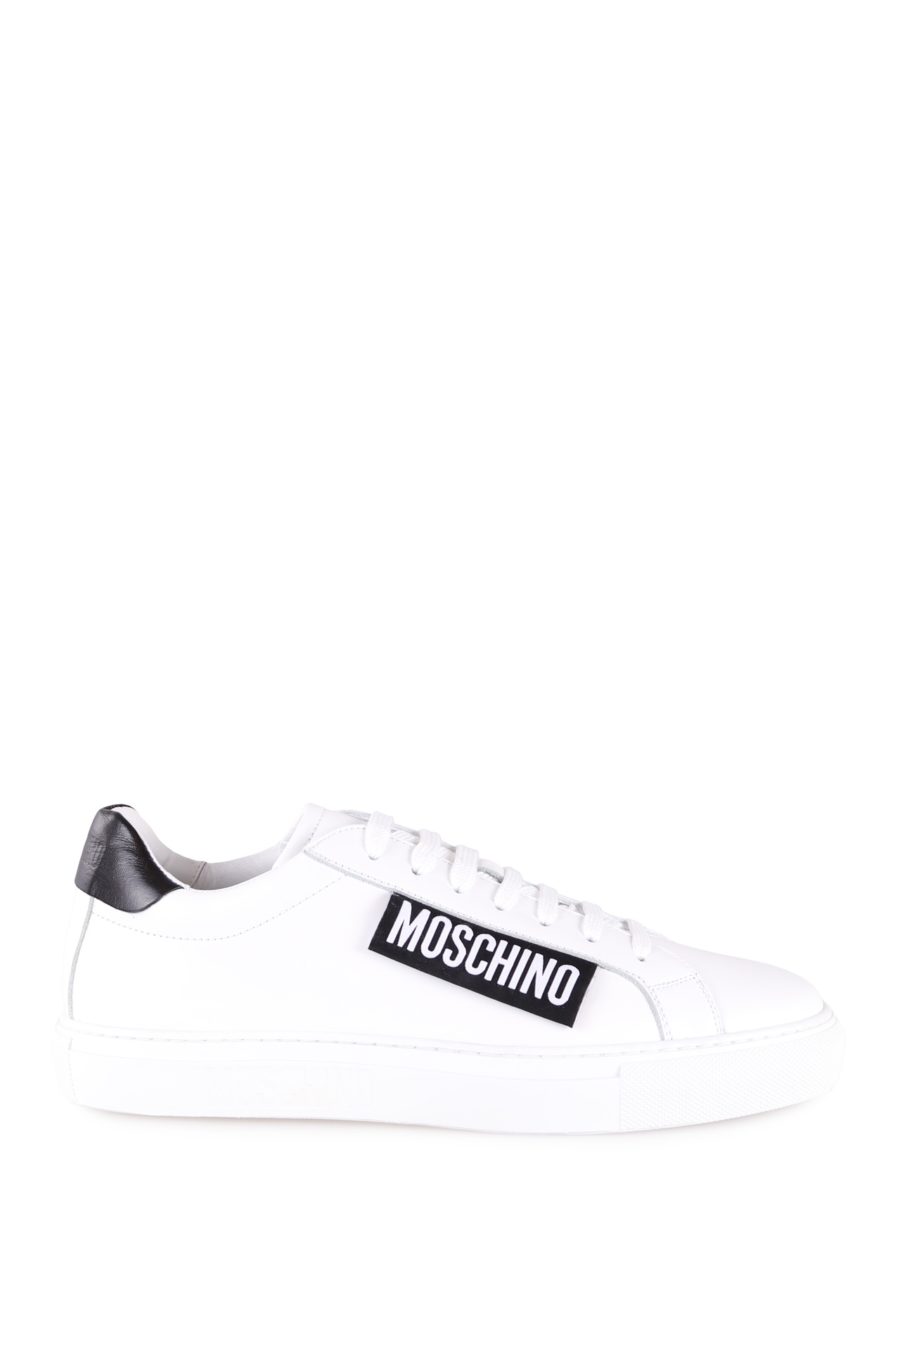 Chaussures Moschino Couture blanc avec logo - bccd00d434f3506999fc281be29a89286cb53253